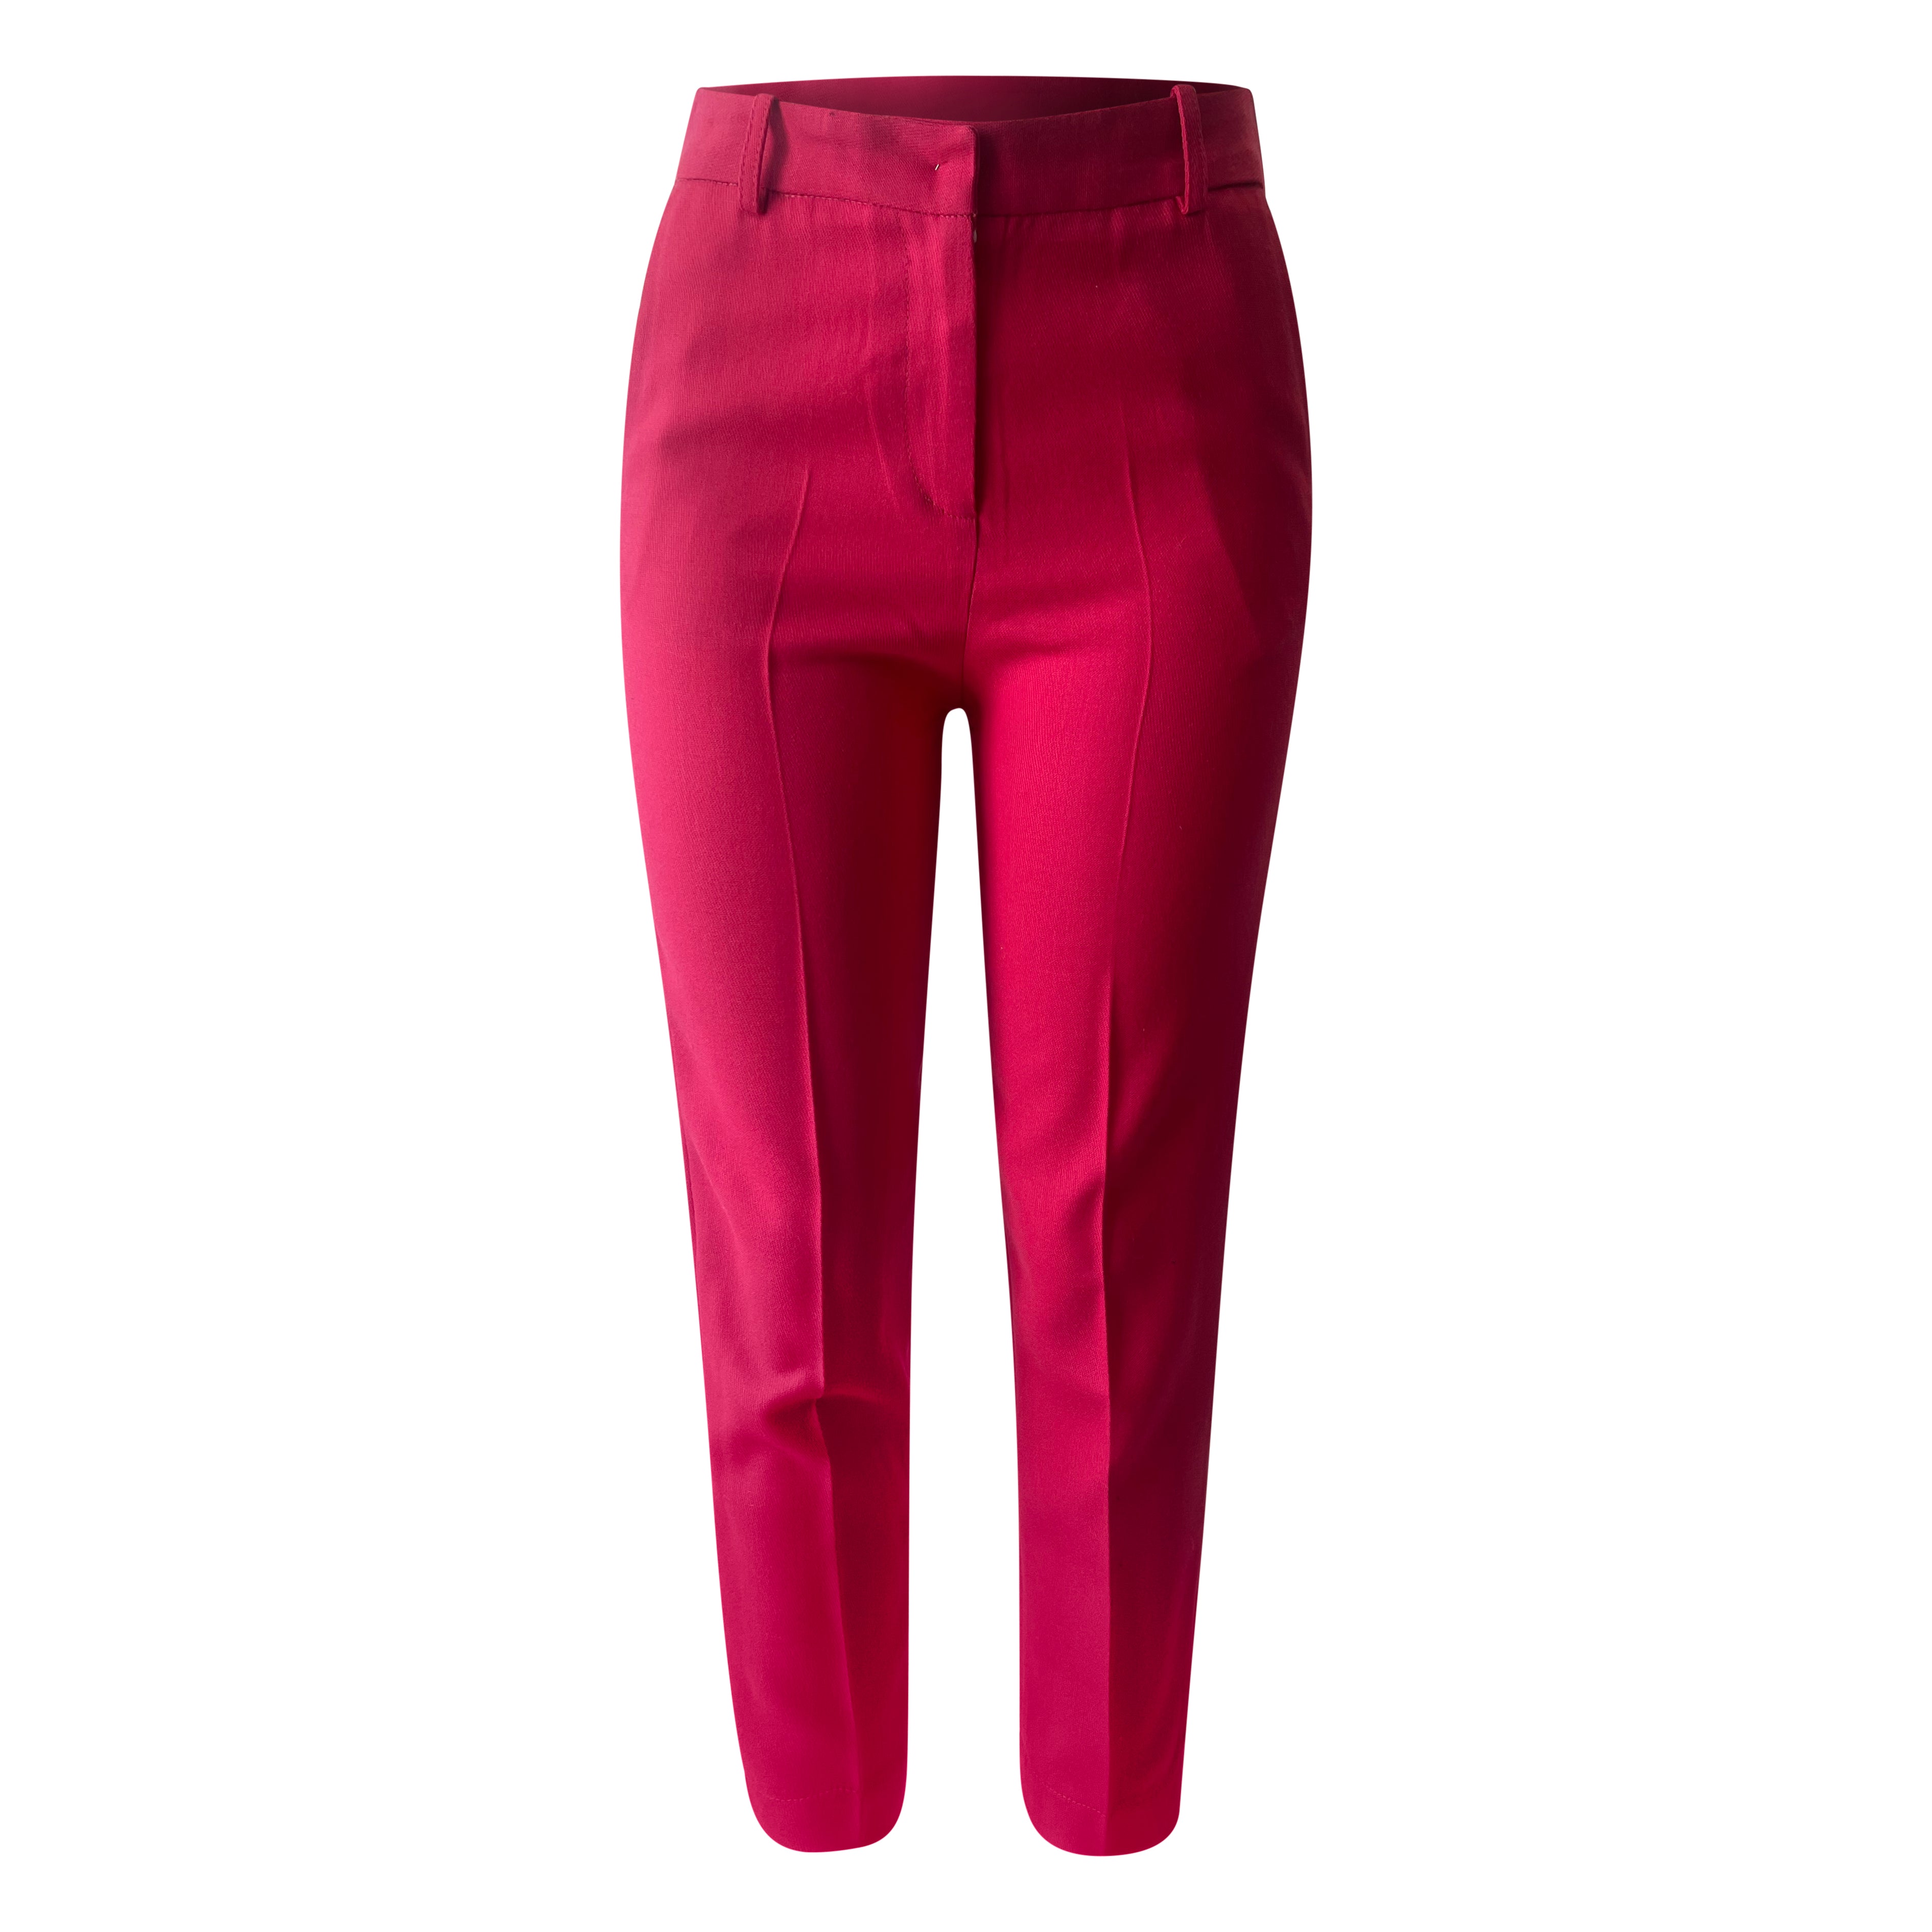 hotpink trousers_ellemadewell